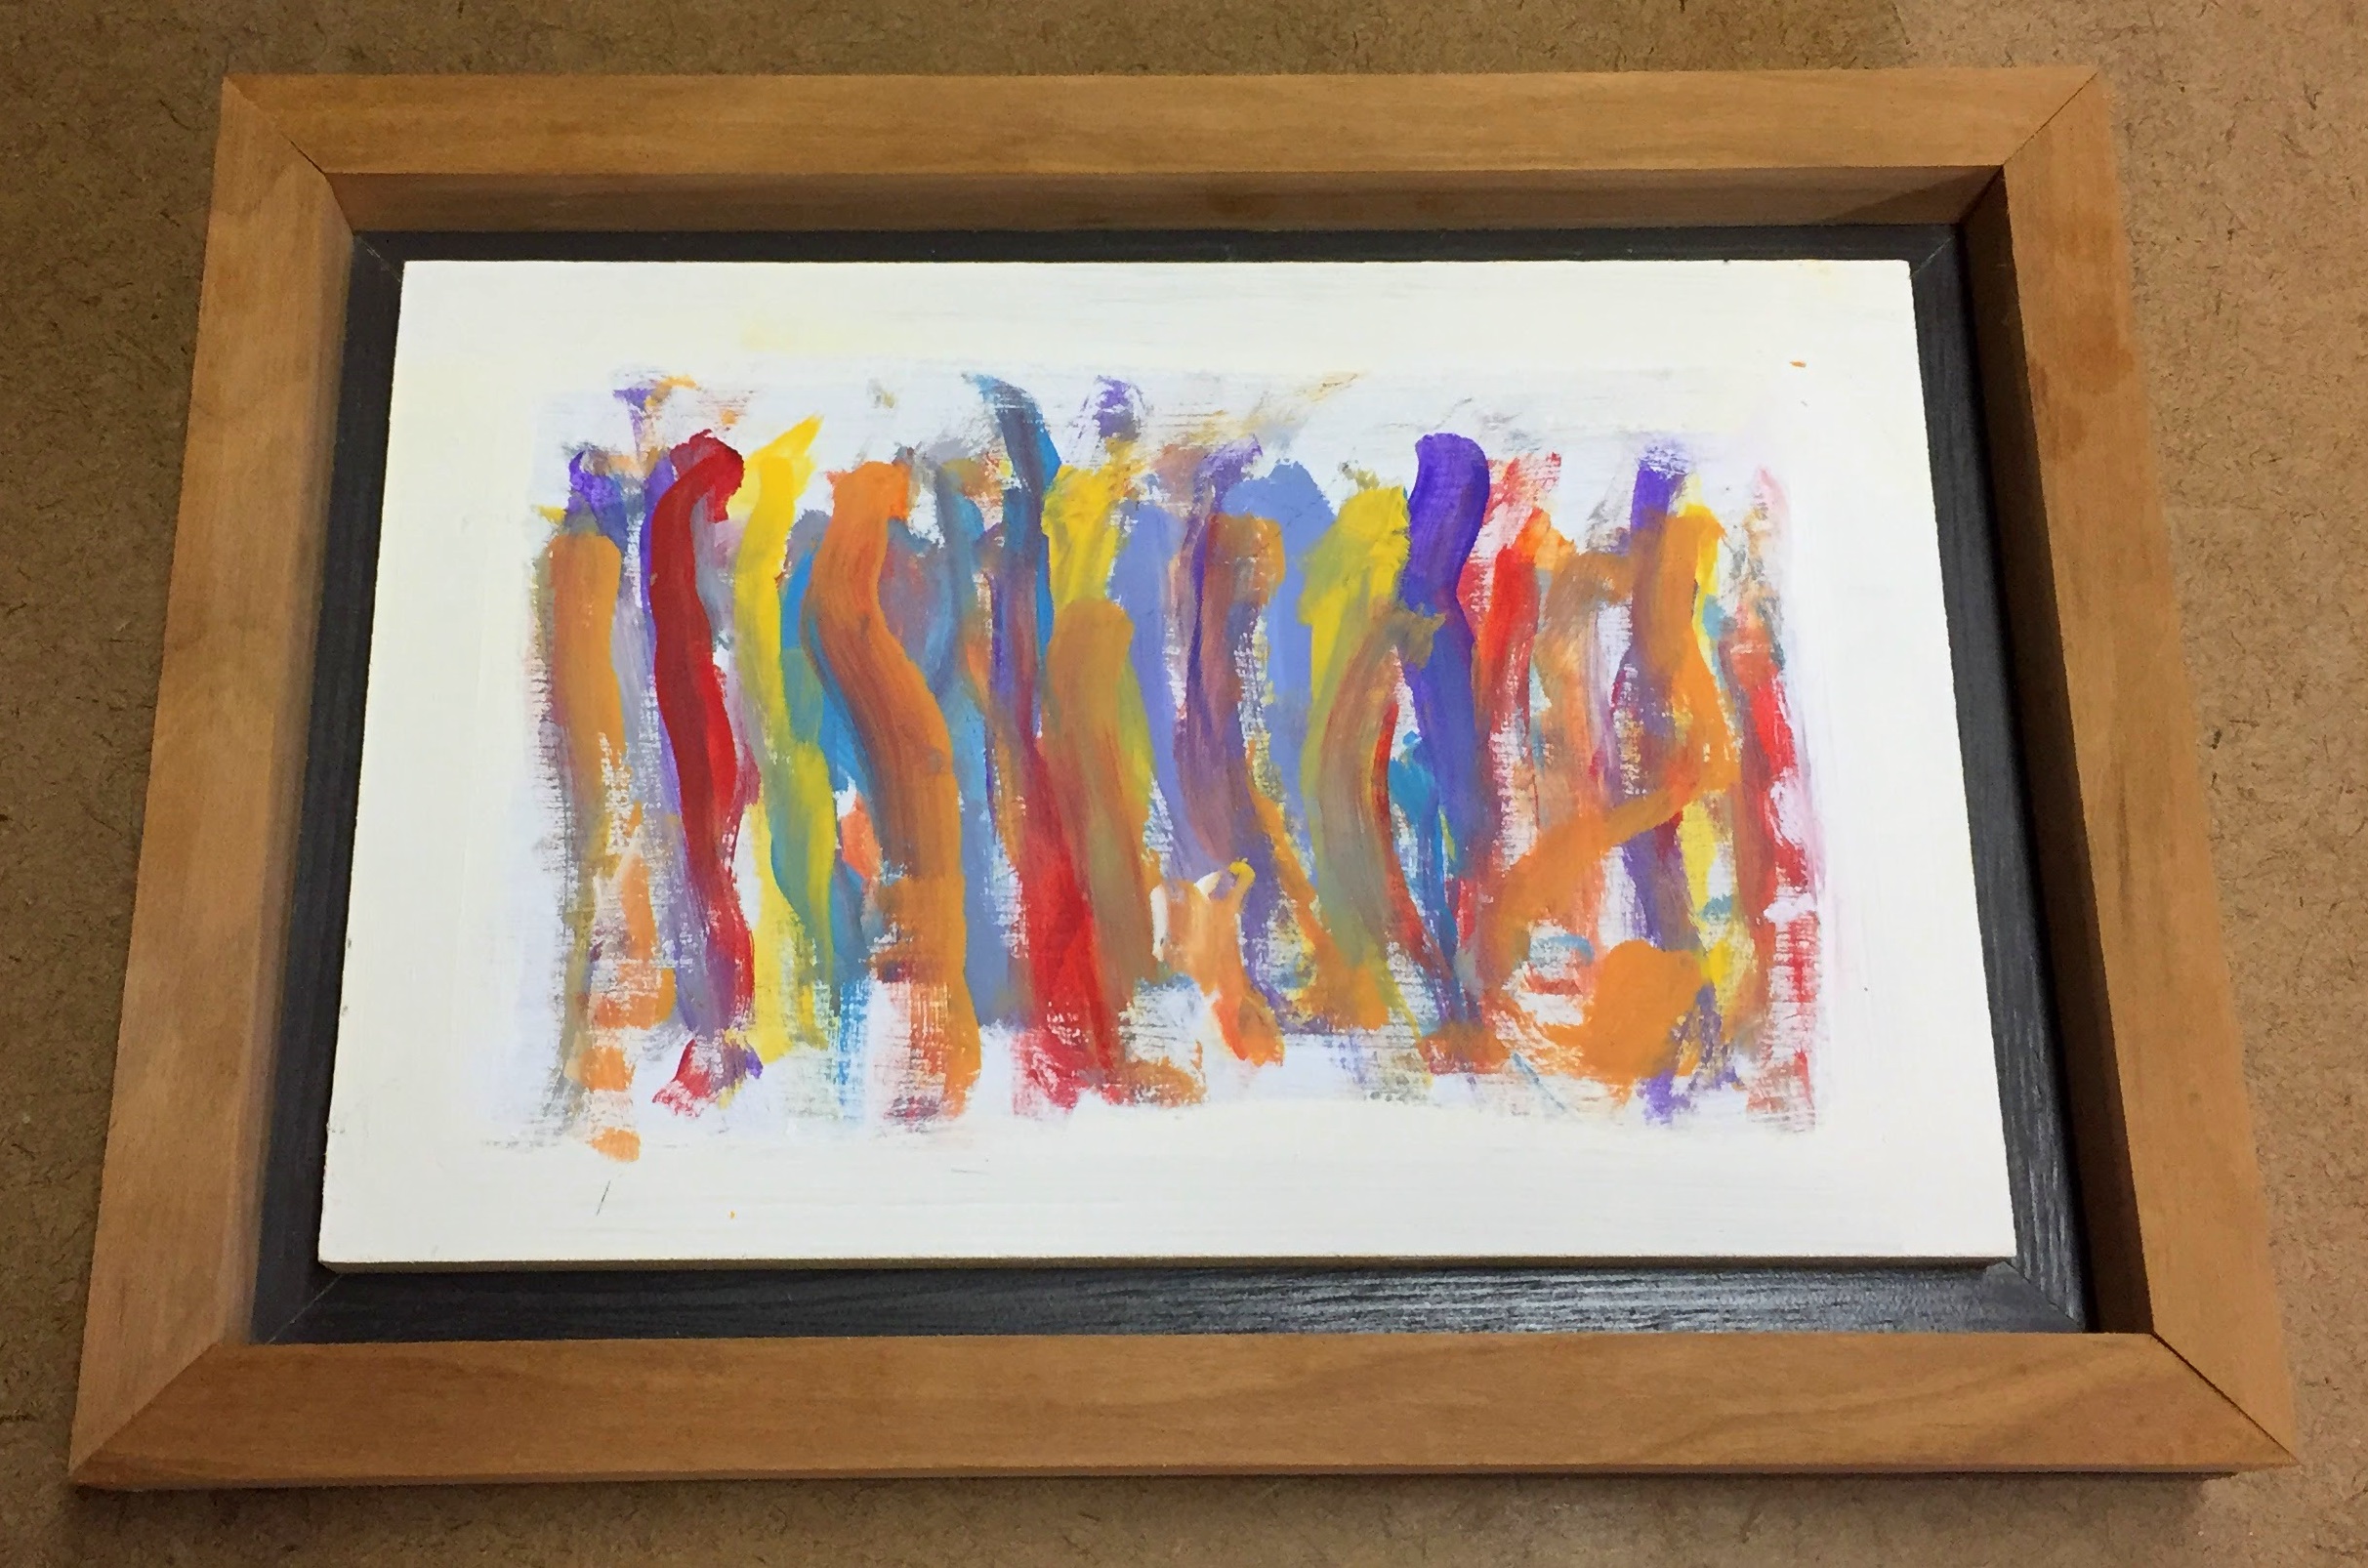 Finished framing of Liam's small abstract oil on wood